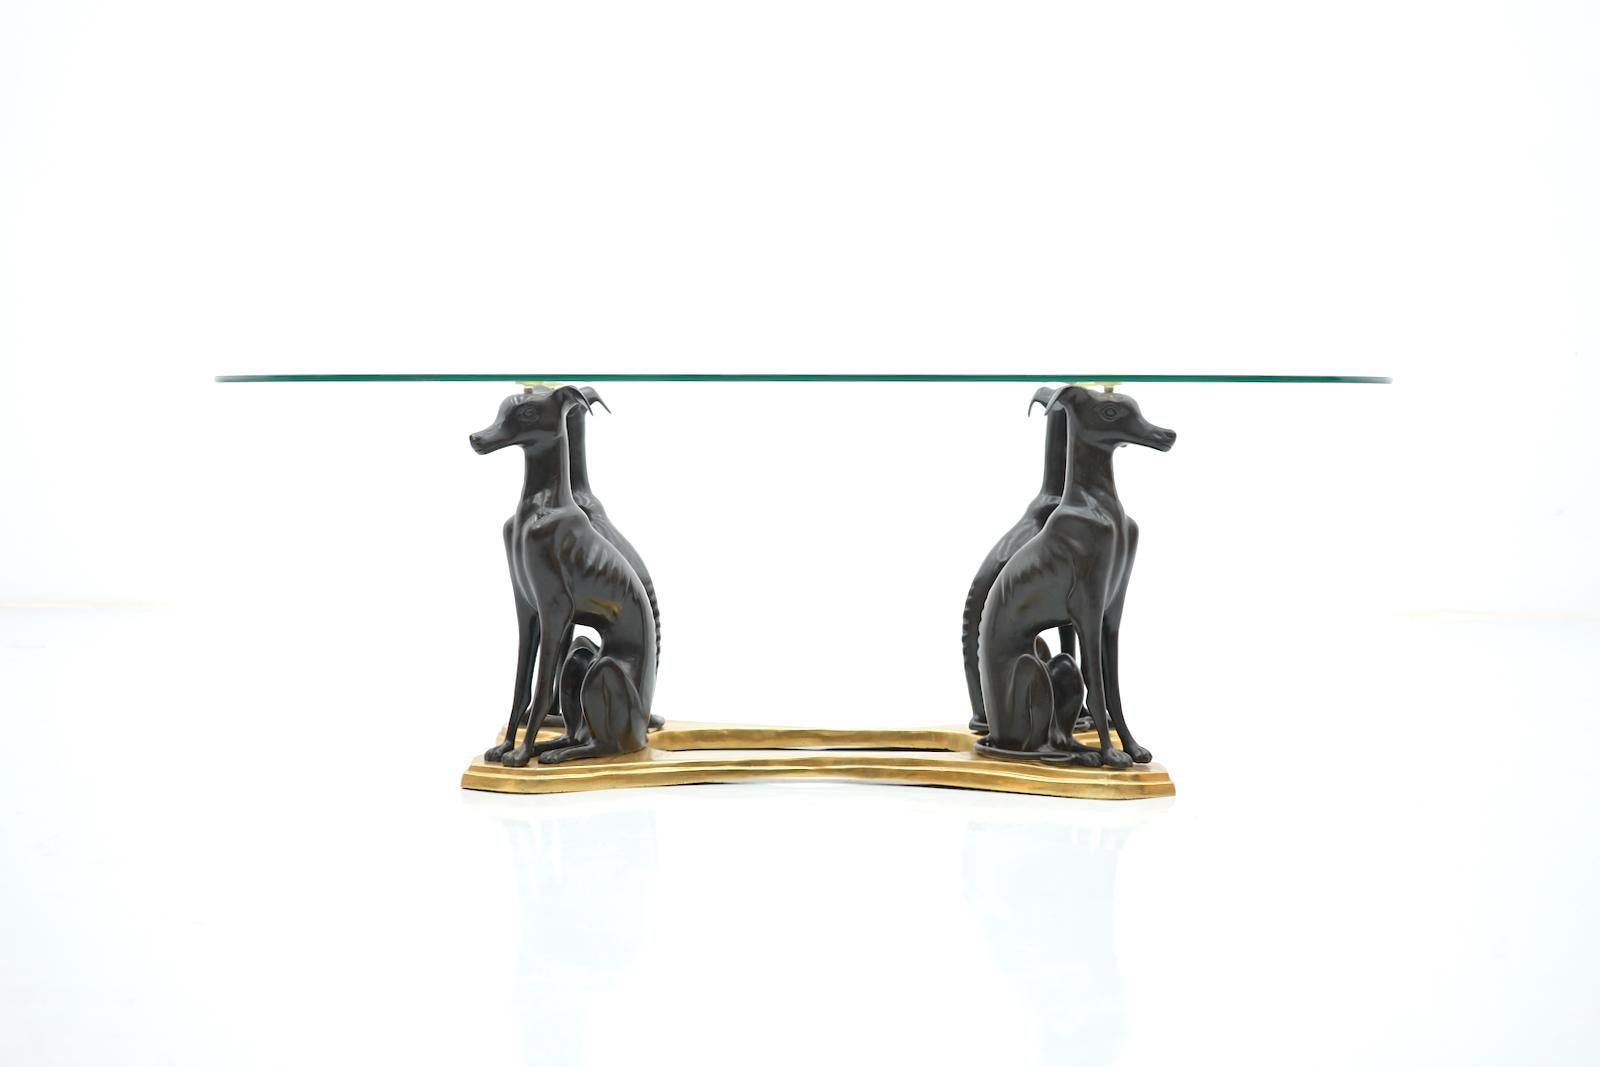 Rare coffee table of Maitland - Smith with four Greyhound Dogs. More often on the market are these tables with only 3 dogs. 
The table frame and the dogs are made of brass. The oval glass top with faceted cut edge.
The table is in very good